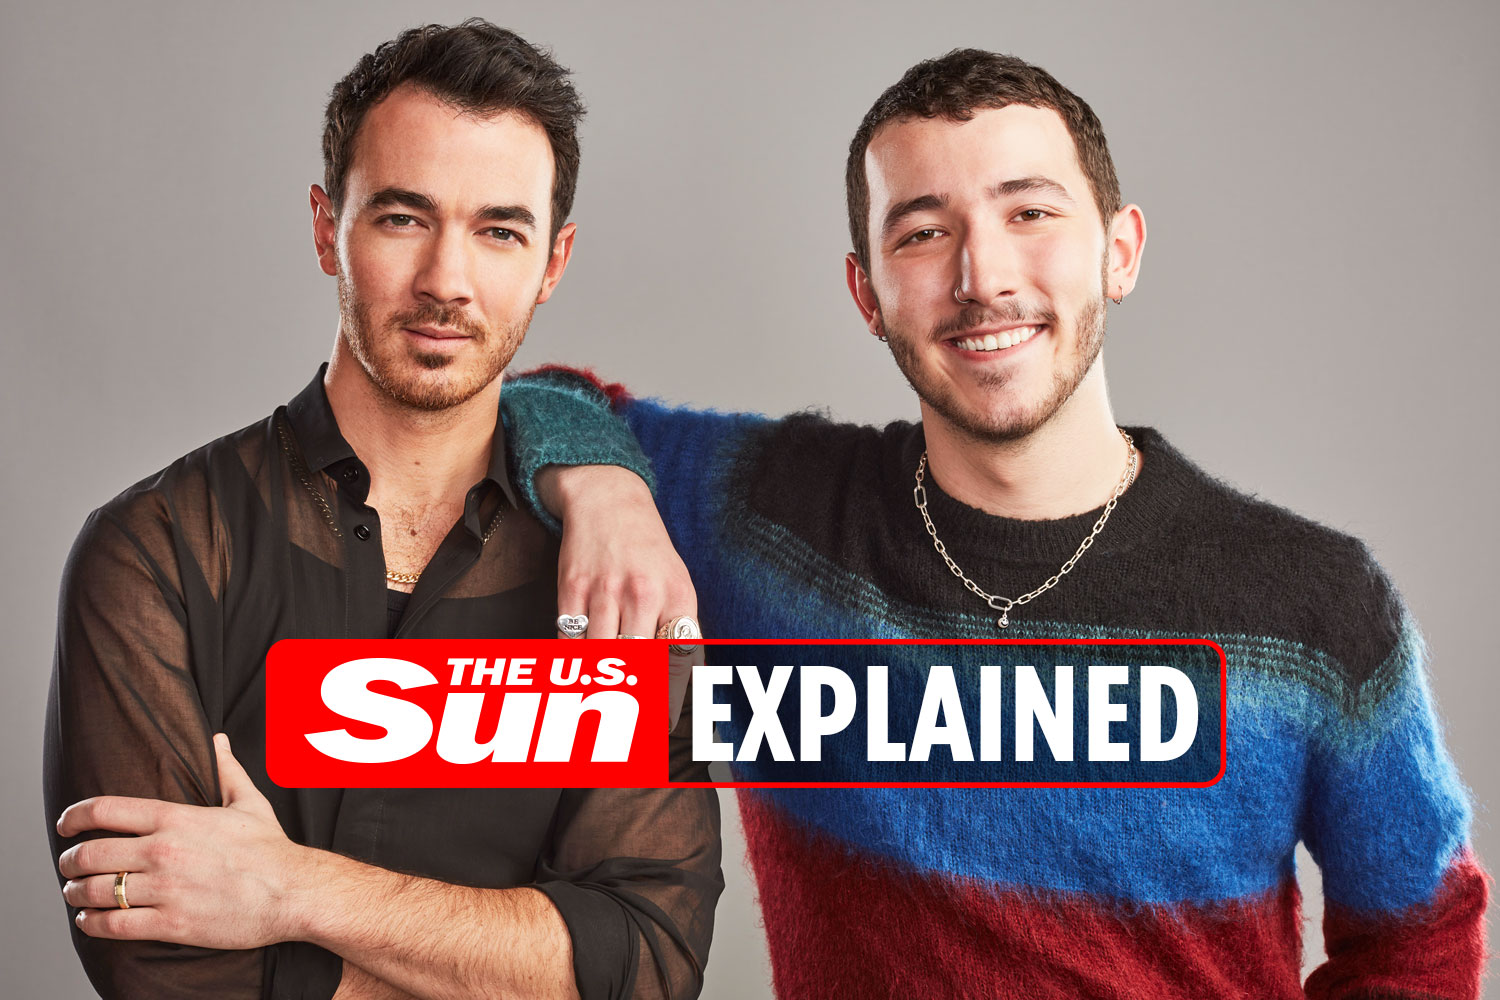 Claim to Fame – How do I view the series by Frankie Jonas and Kevin?